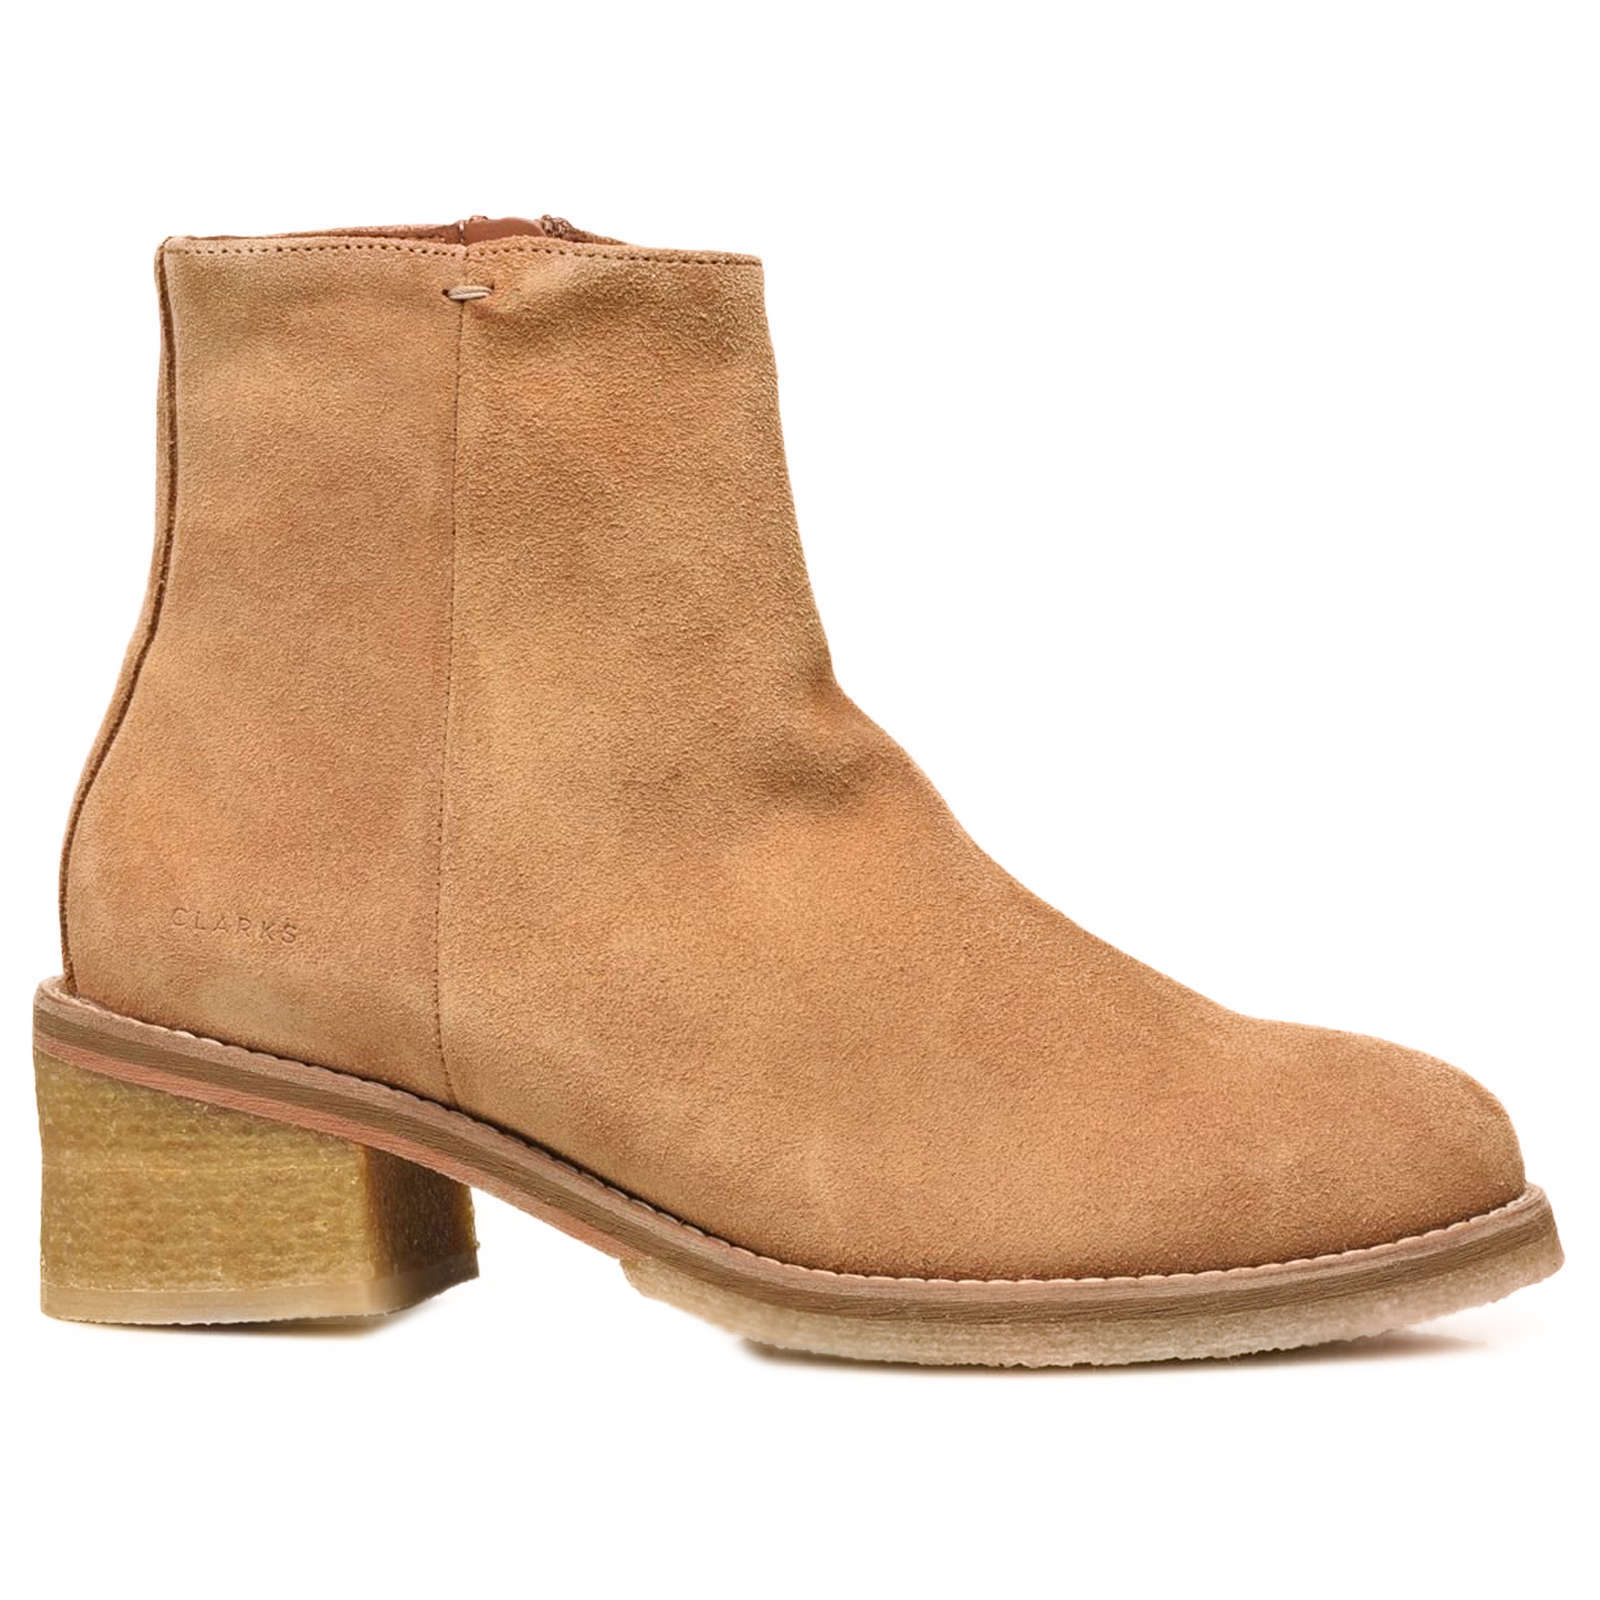 Clarks Originals Amara Crepe Suede Leather Women's Heeled Ankle Boots#color_tan